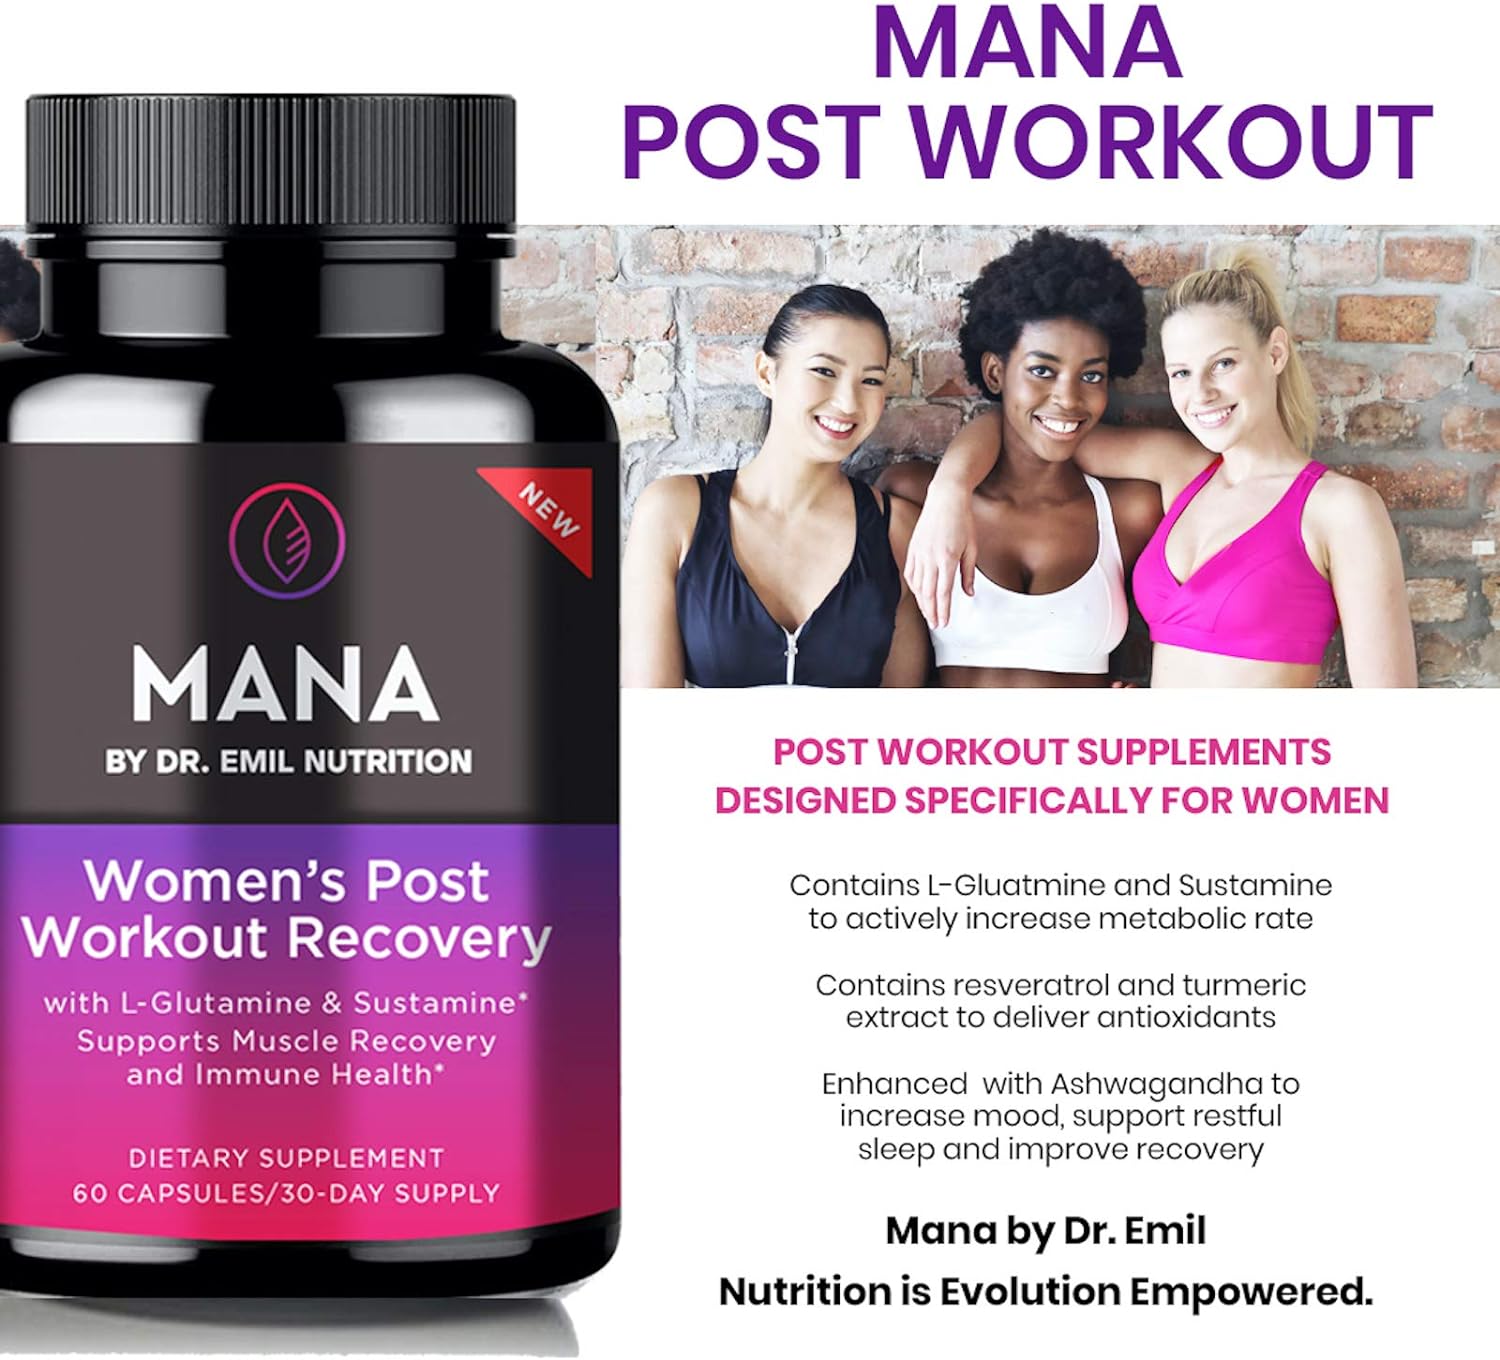 DR EMIL NUTRITION MANA Post-Workout Recovery Capsule for Women with L-